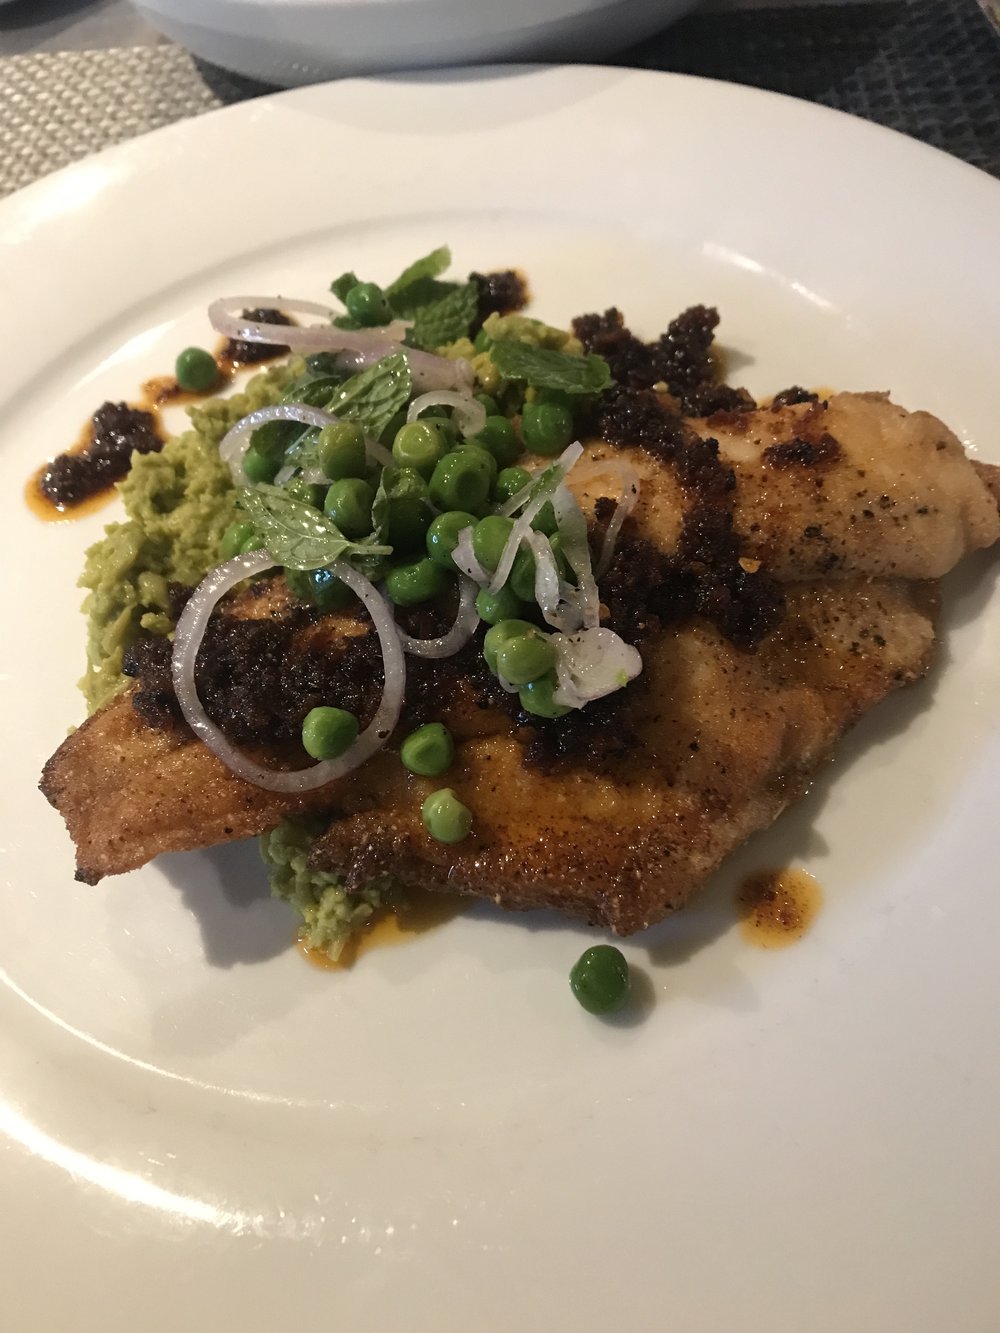 Fried catfish with peas